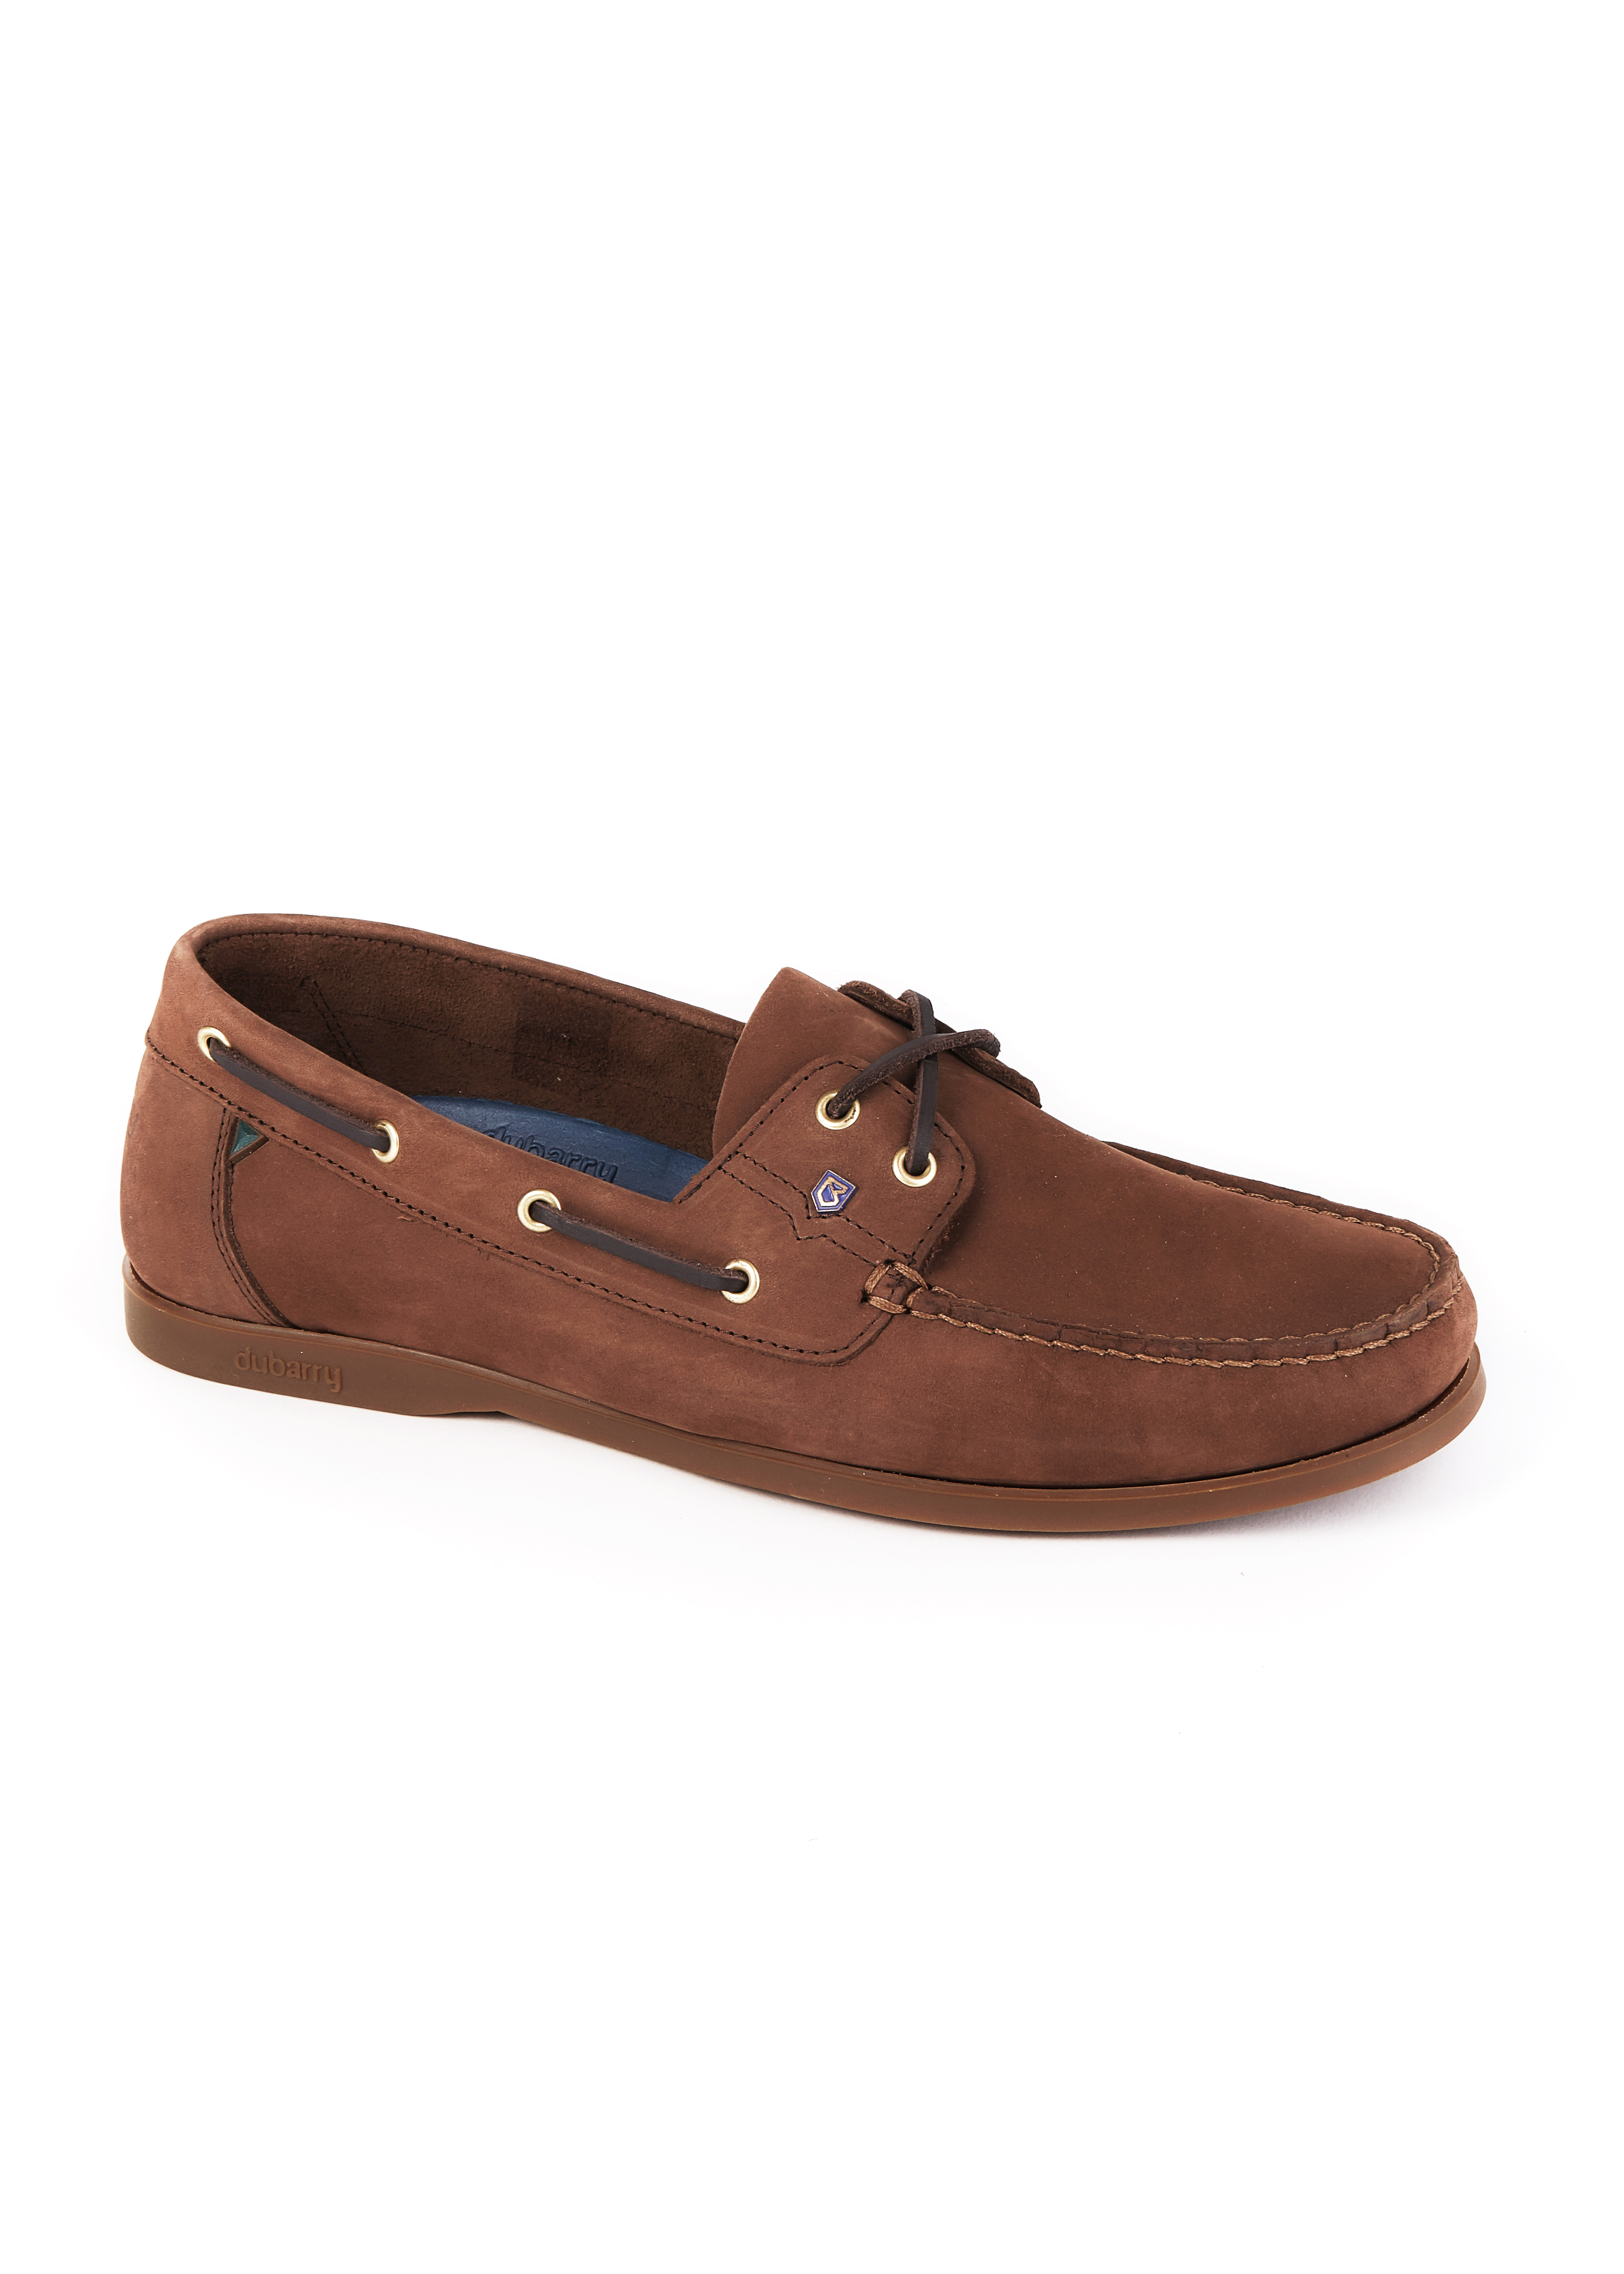 dubarry boat shoes